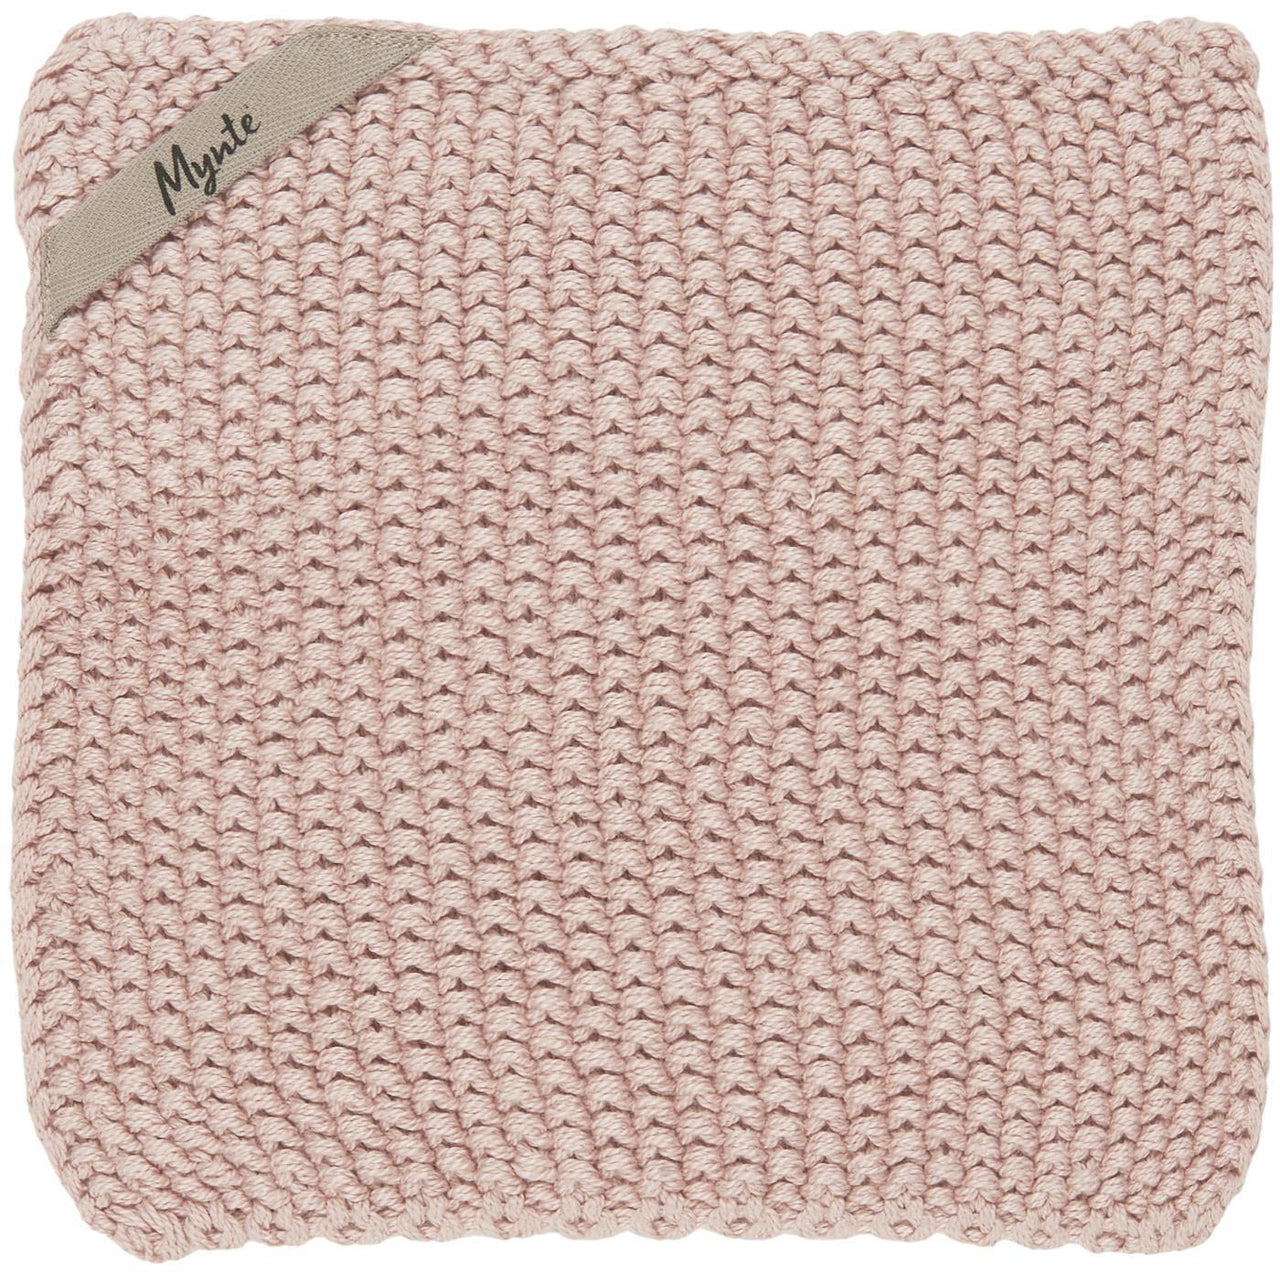 Pot Holder Rose Shadow Knitted